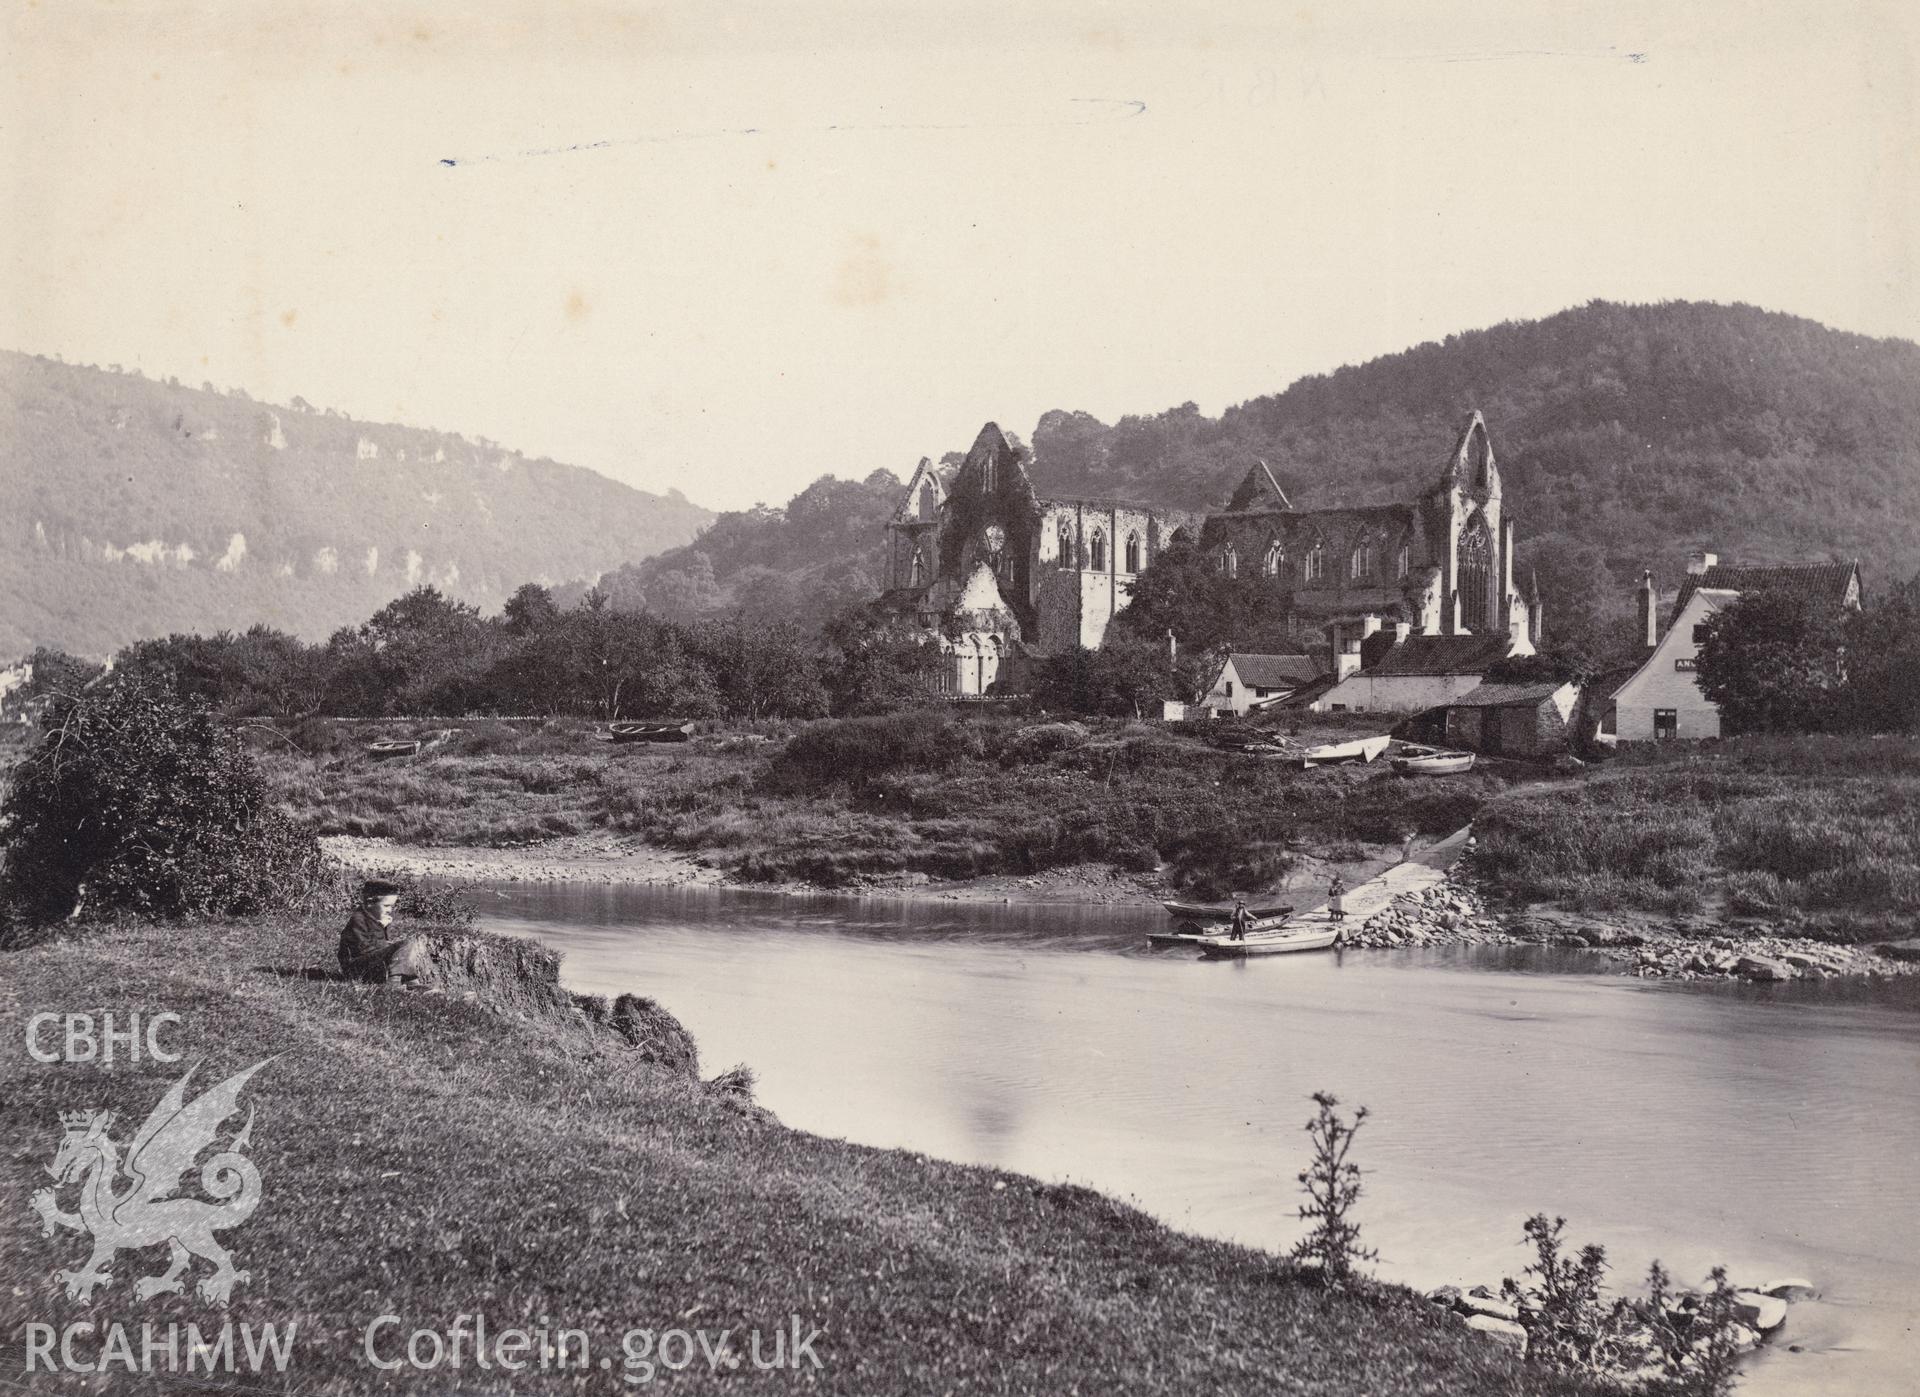 Digital copy of a circa 1870 albumen print showing a view of Tintern Abbey from across the river.